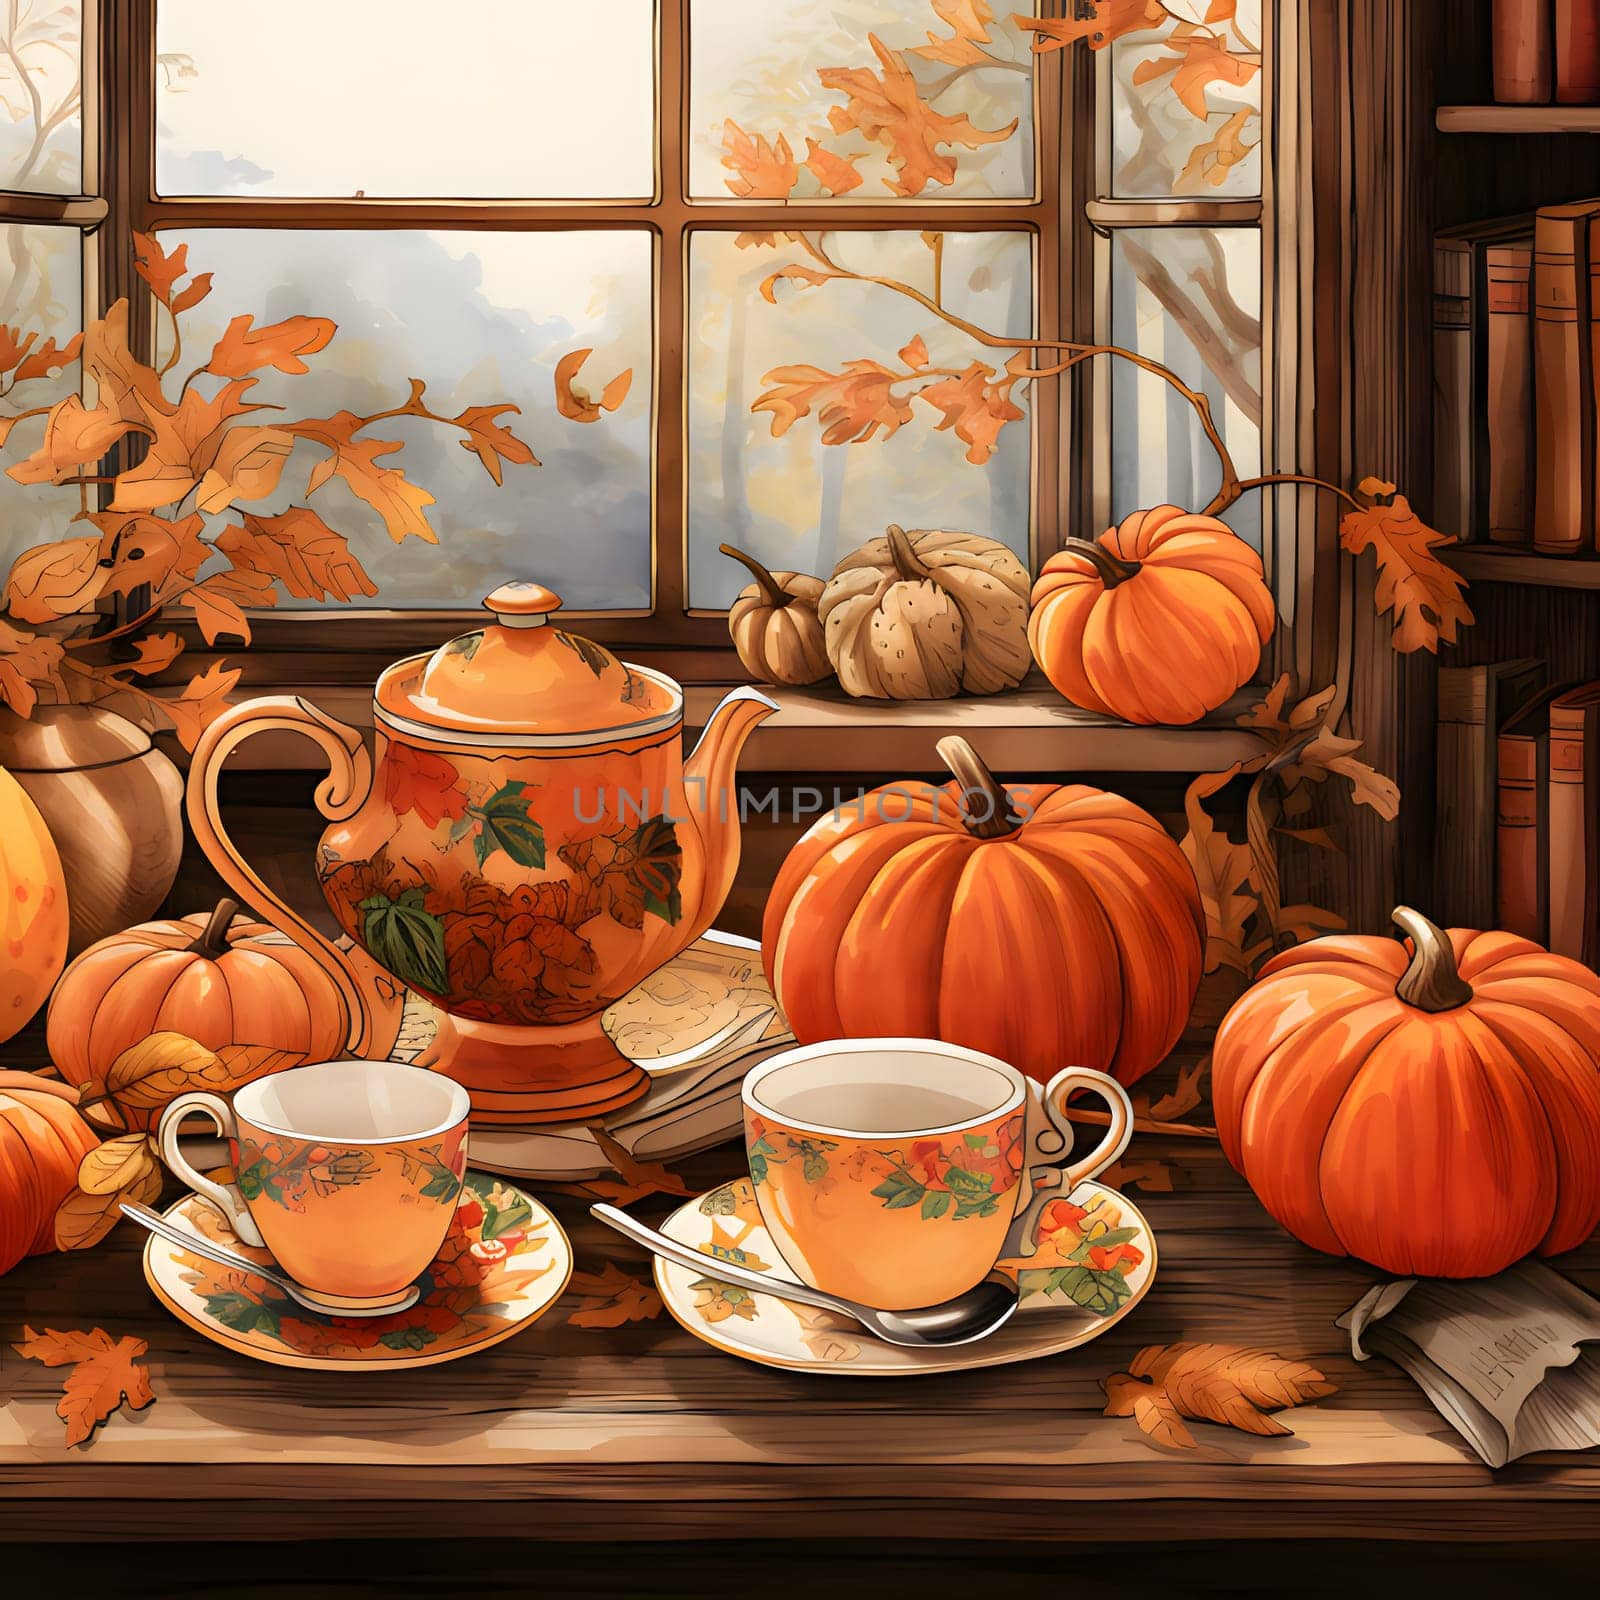 Illustration wooden desk and on it coffee cups, all around pumpkins, books, autumn leaves. Pumpkin as a dish of thanksgiving for the harvest. by ThemesS